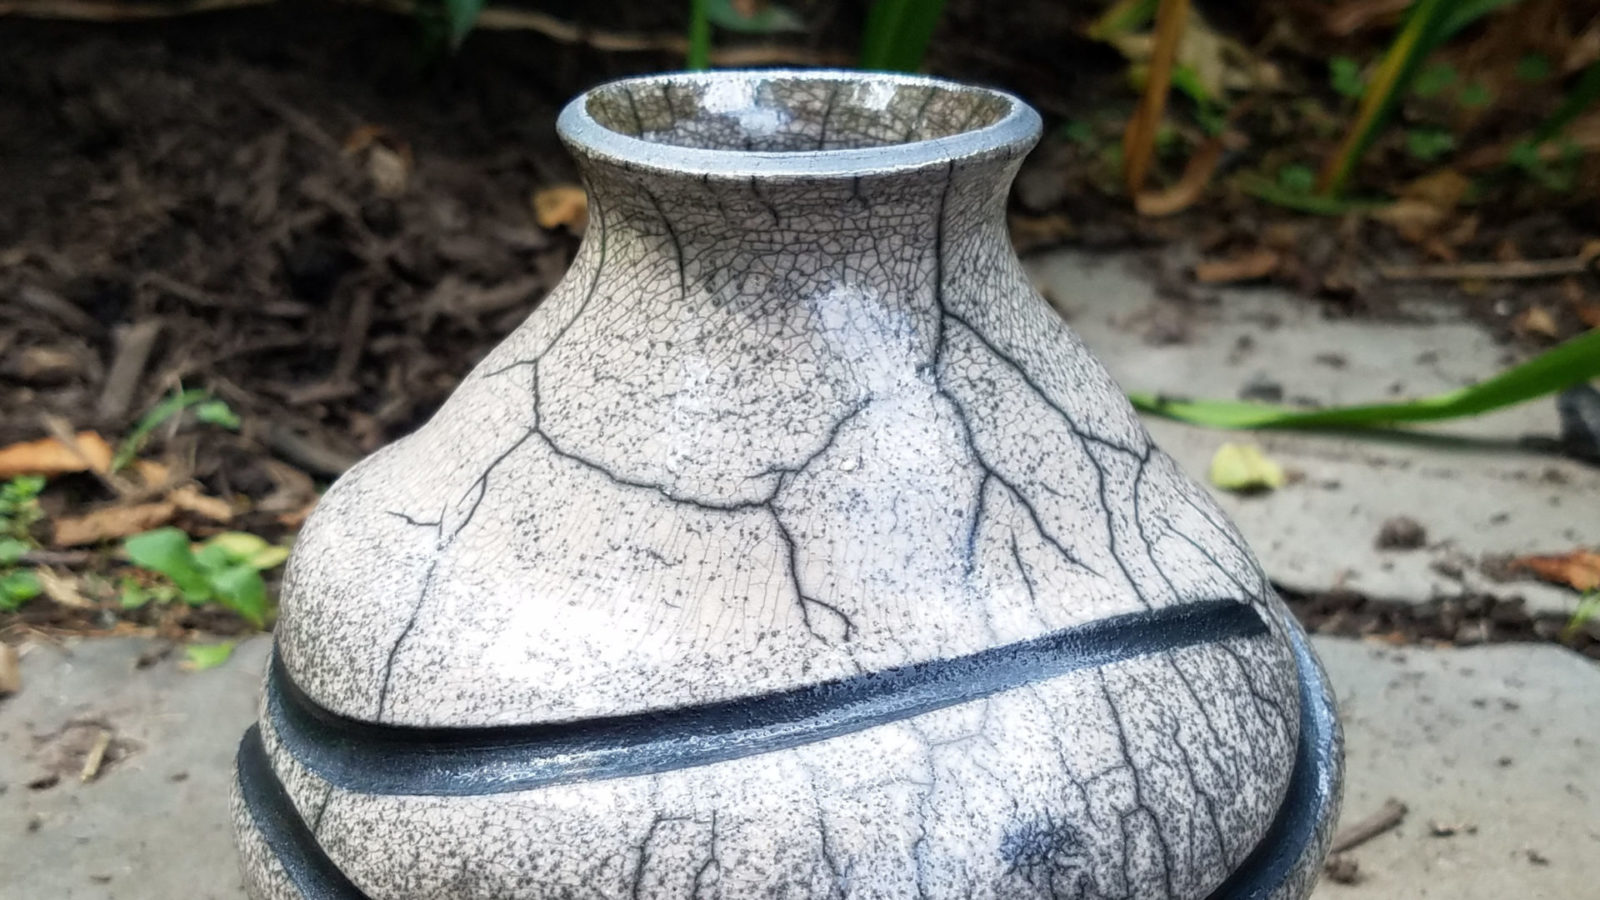 A raku vessel made by Donna Bernstein, a ceramics artist at the Clay Cottage gallery and studio, sits on a patio in the sun. Press photo courtesy of the artist